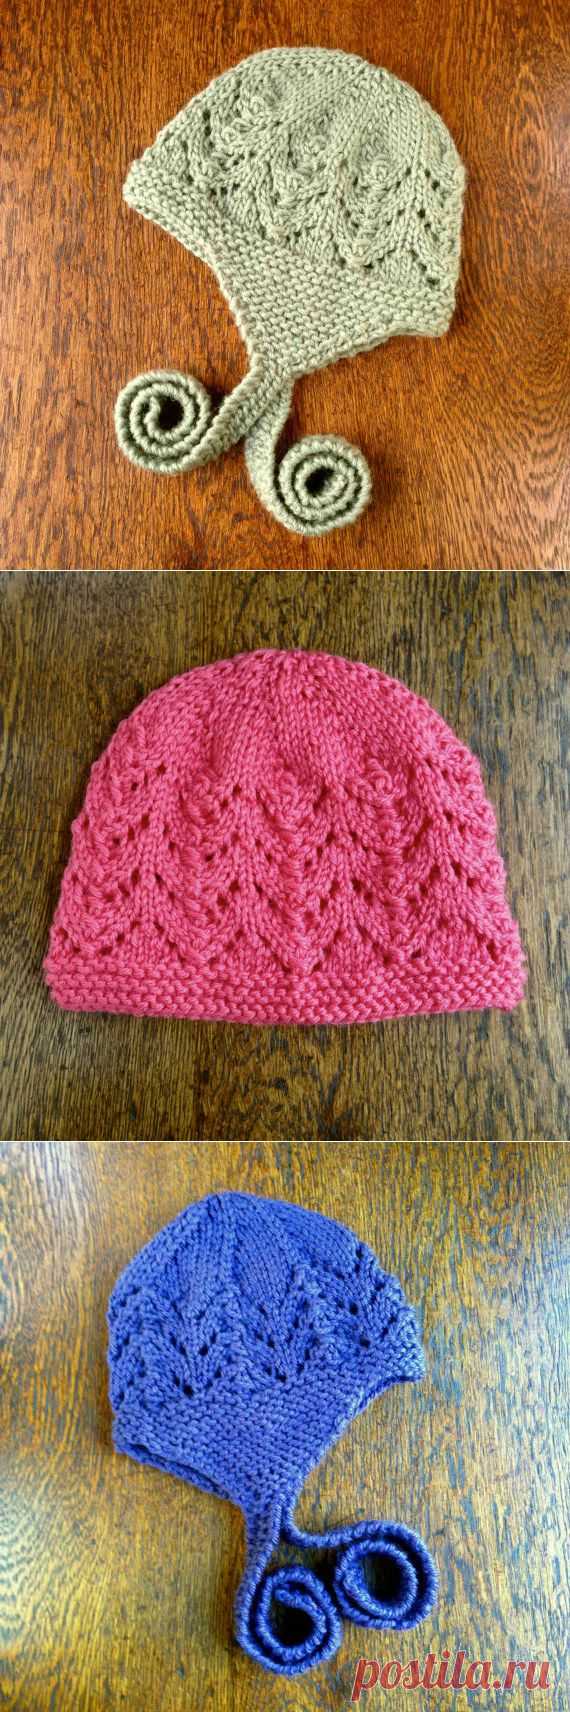 PDF Sparrow Hat Pattern DIGITAL Download by SharaLambethDesigns